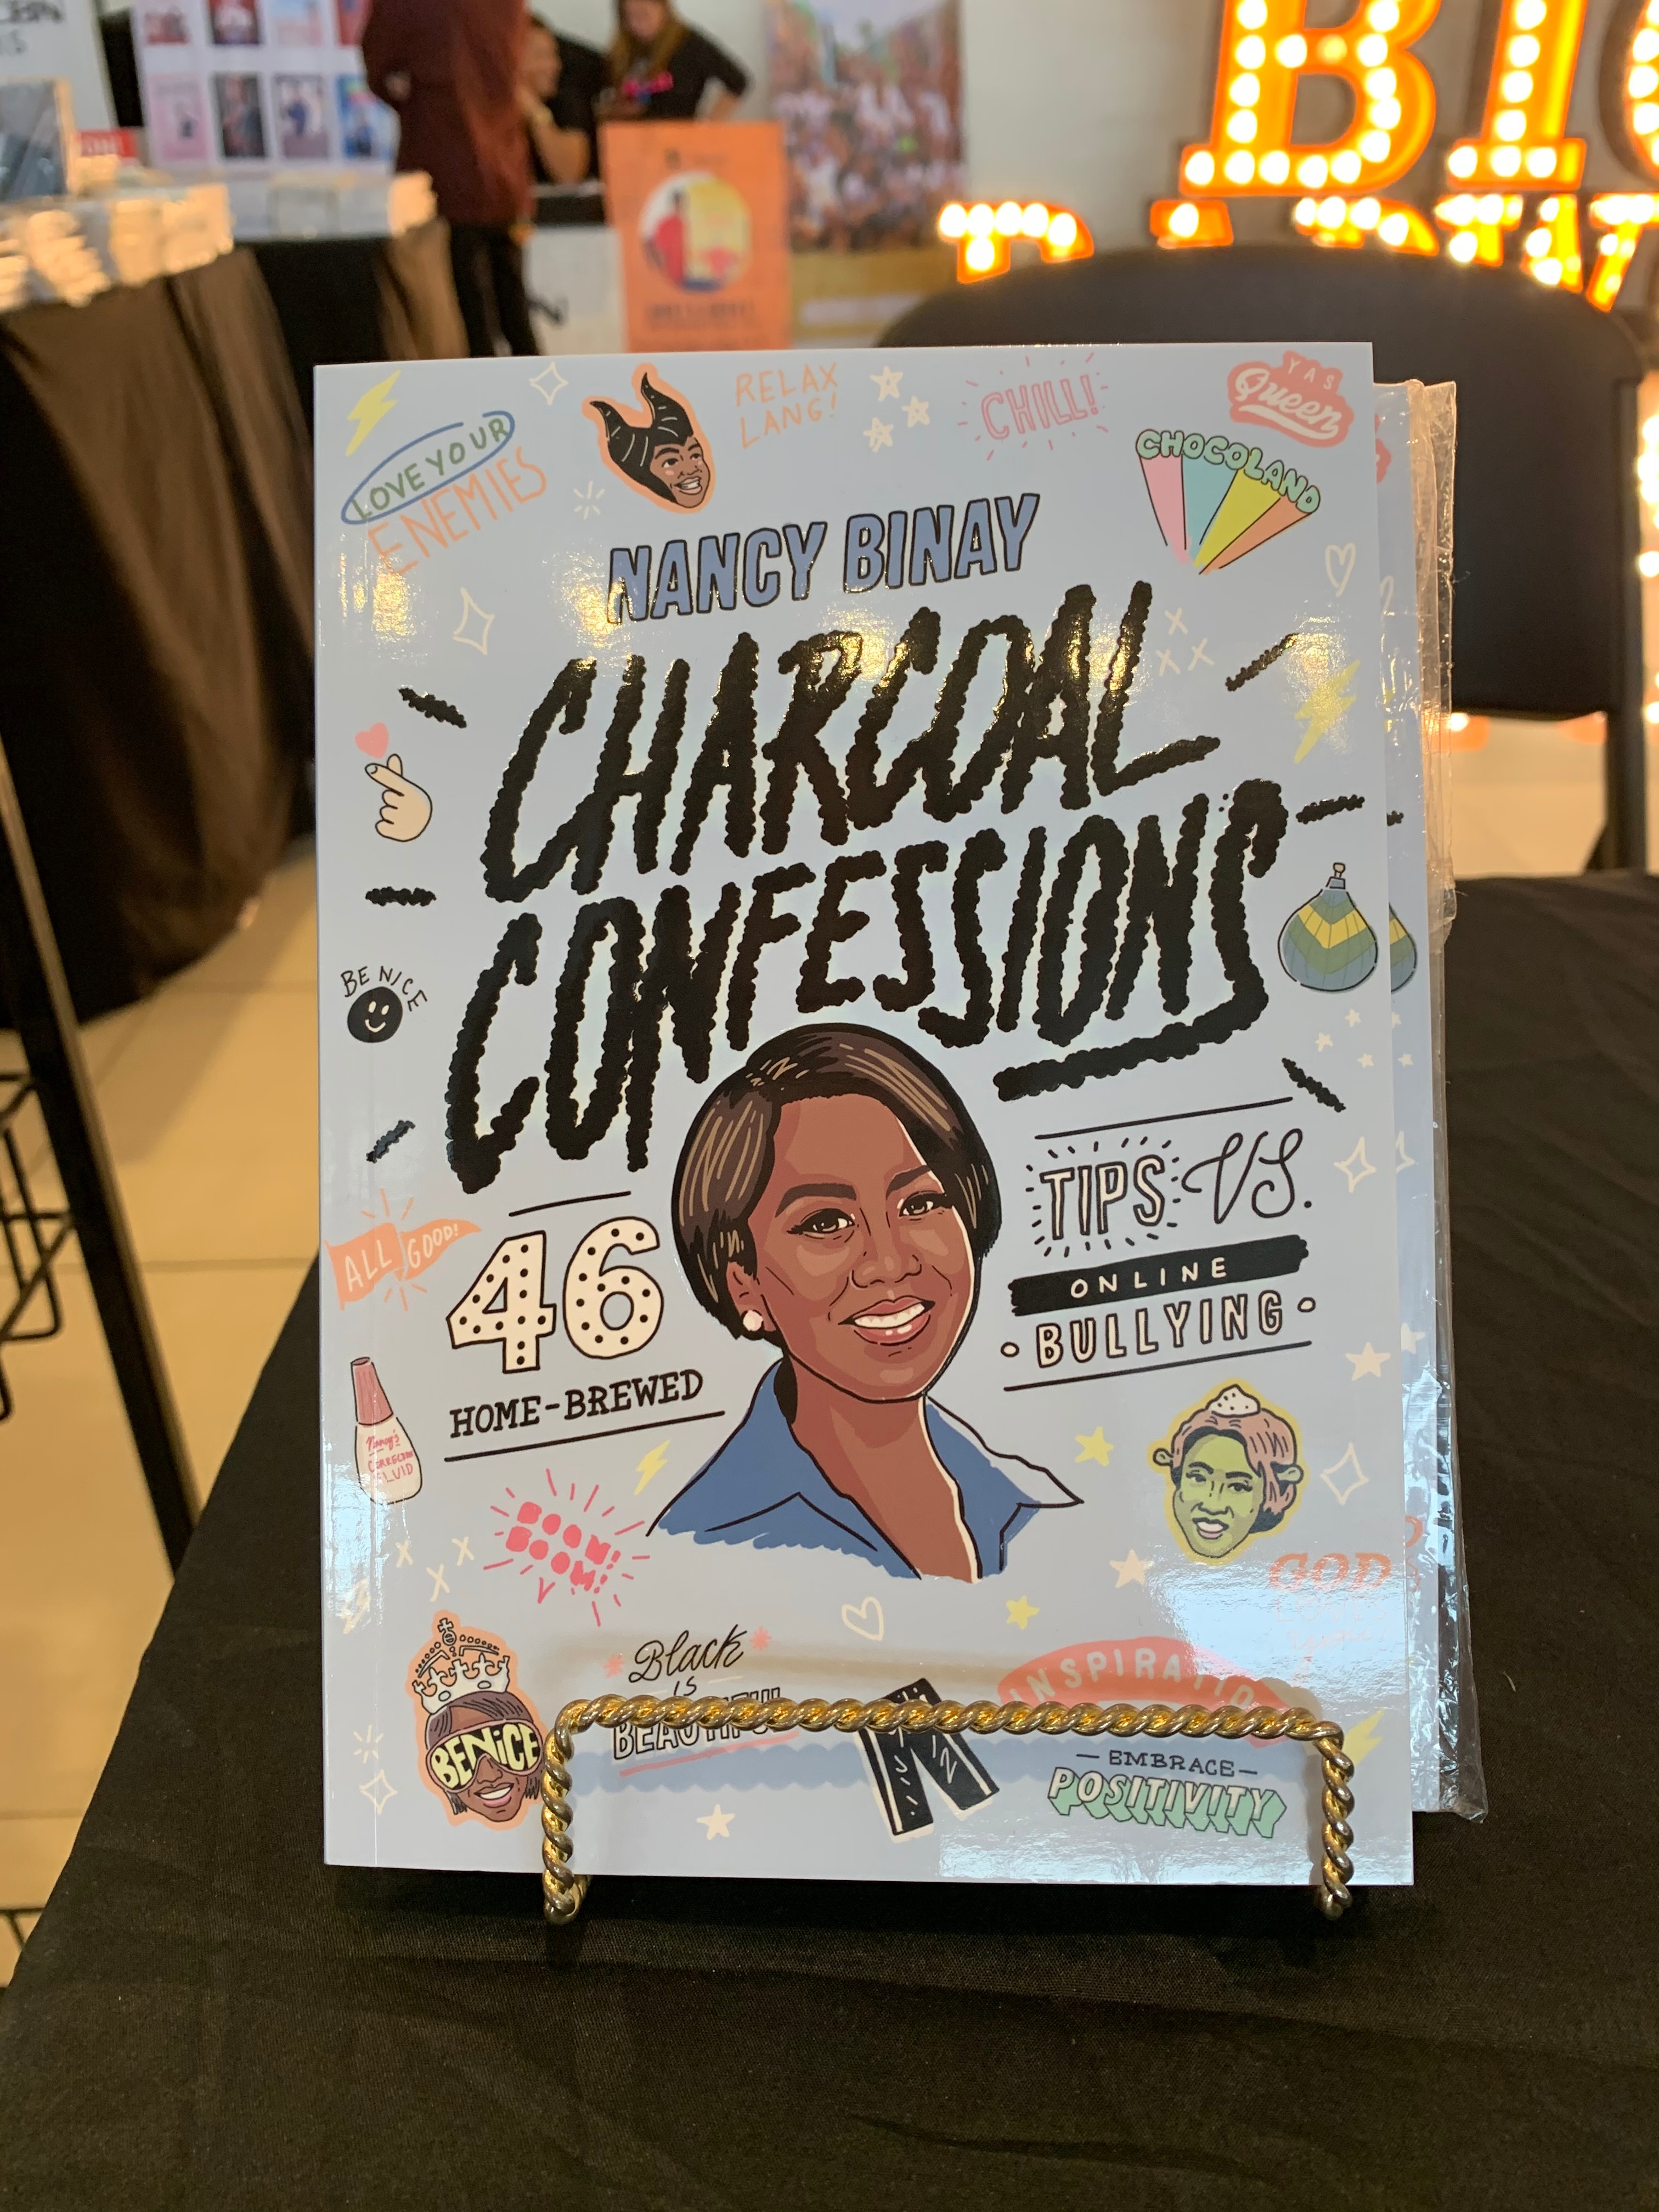 Senator Nancy Binay launches new book 'Charcoal Confessions' under ABS CBN Books (2)